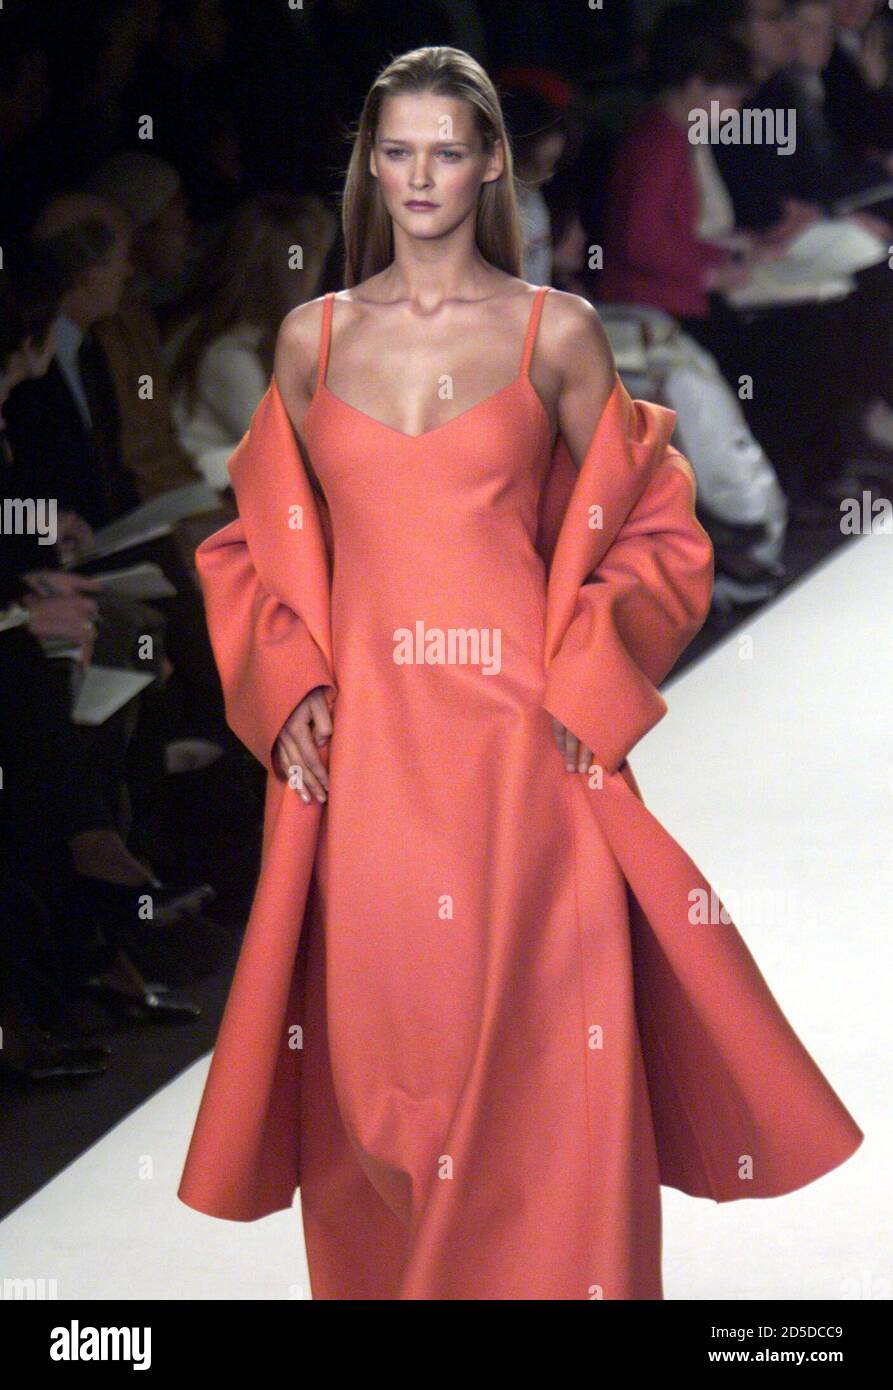 A model wears an orange felt coat over a matching gown during the Ralph  Lauren Fall/Winter 1999 fashion show in New York, February 17. Many top  fashion designers are showing their Fall/Winter